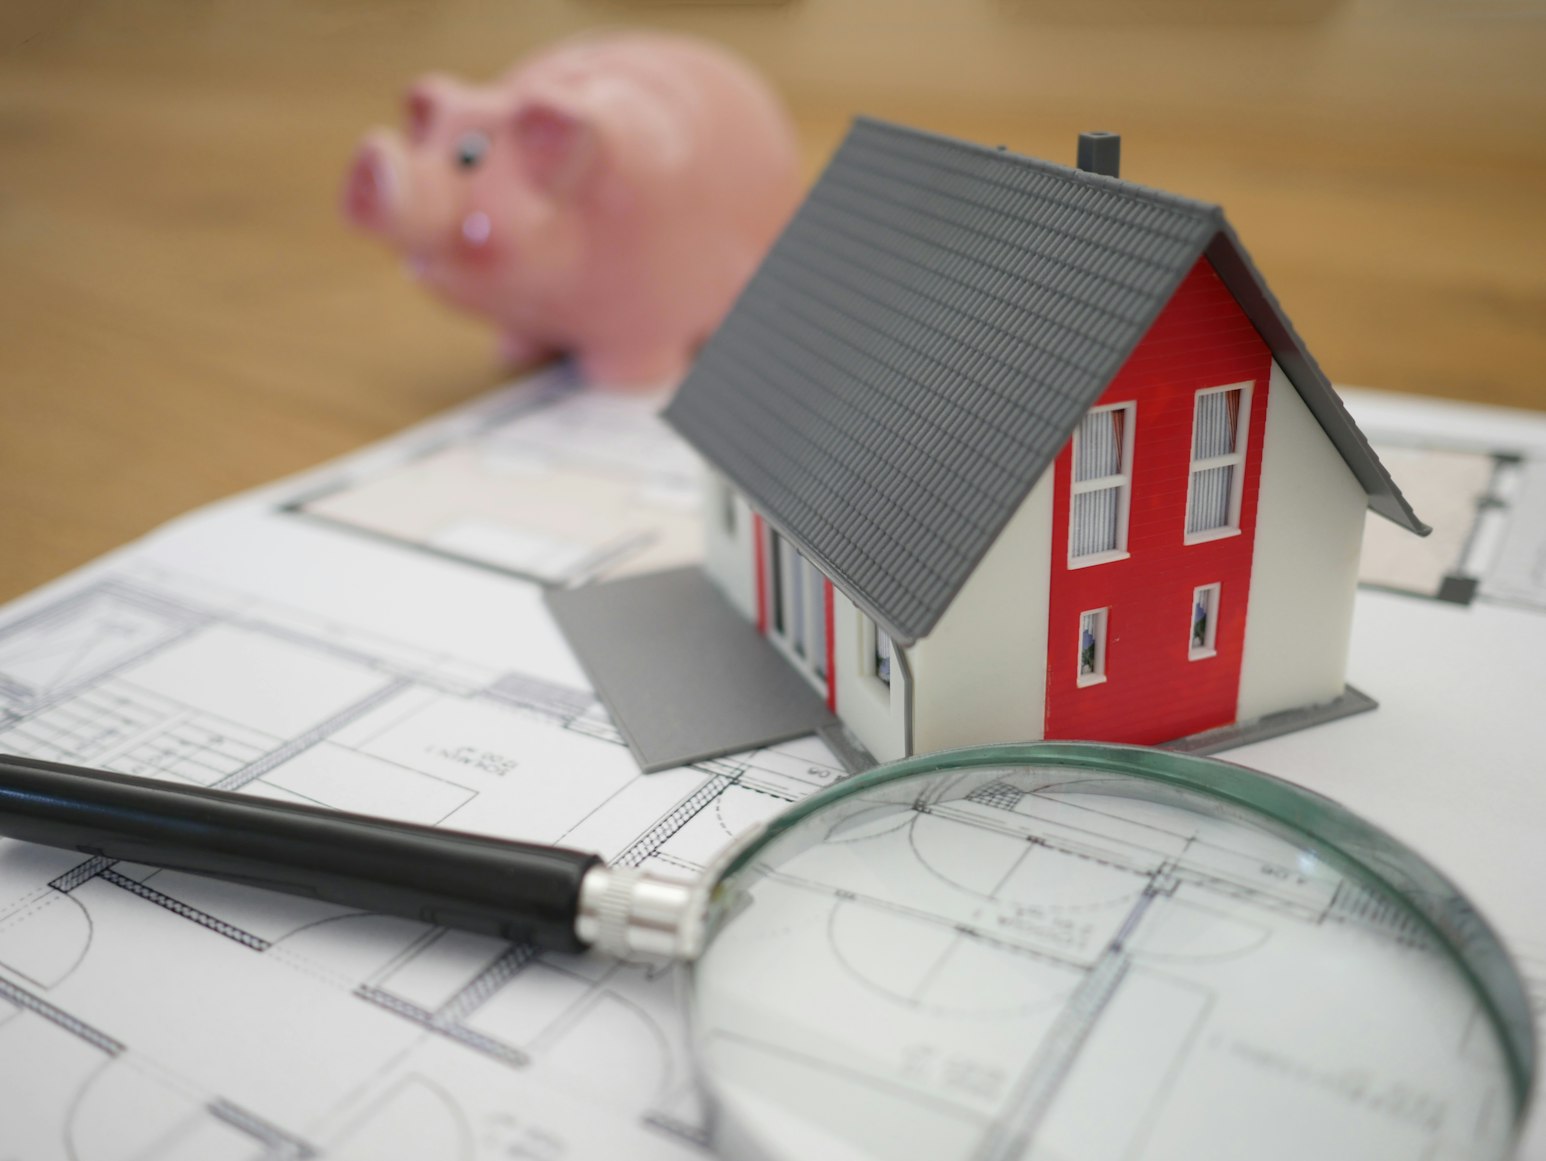 Miniature house next to a miniature piggy bank and magnifying glass.